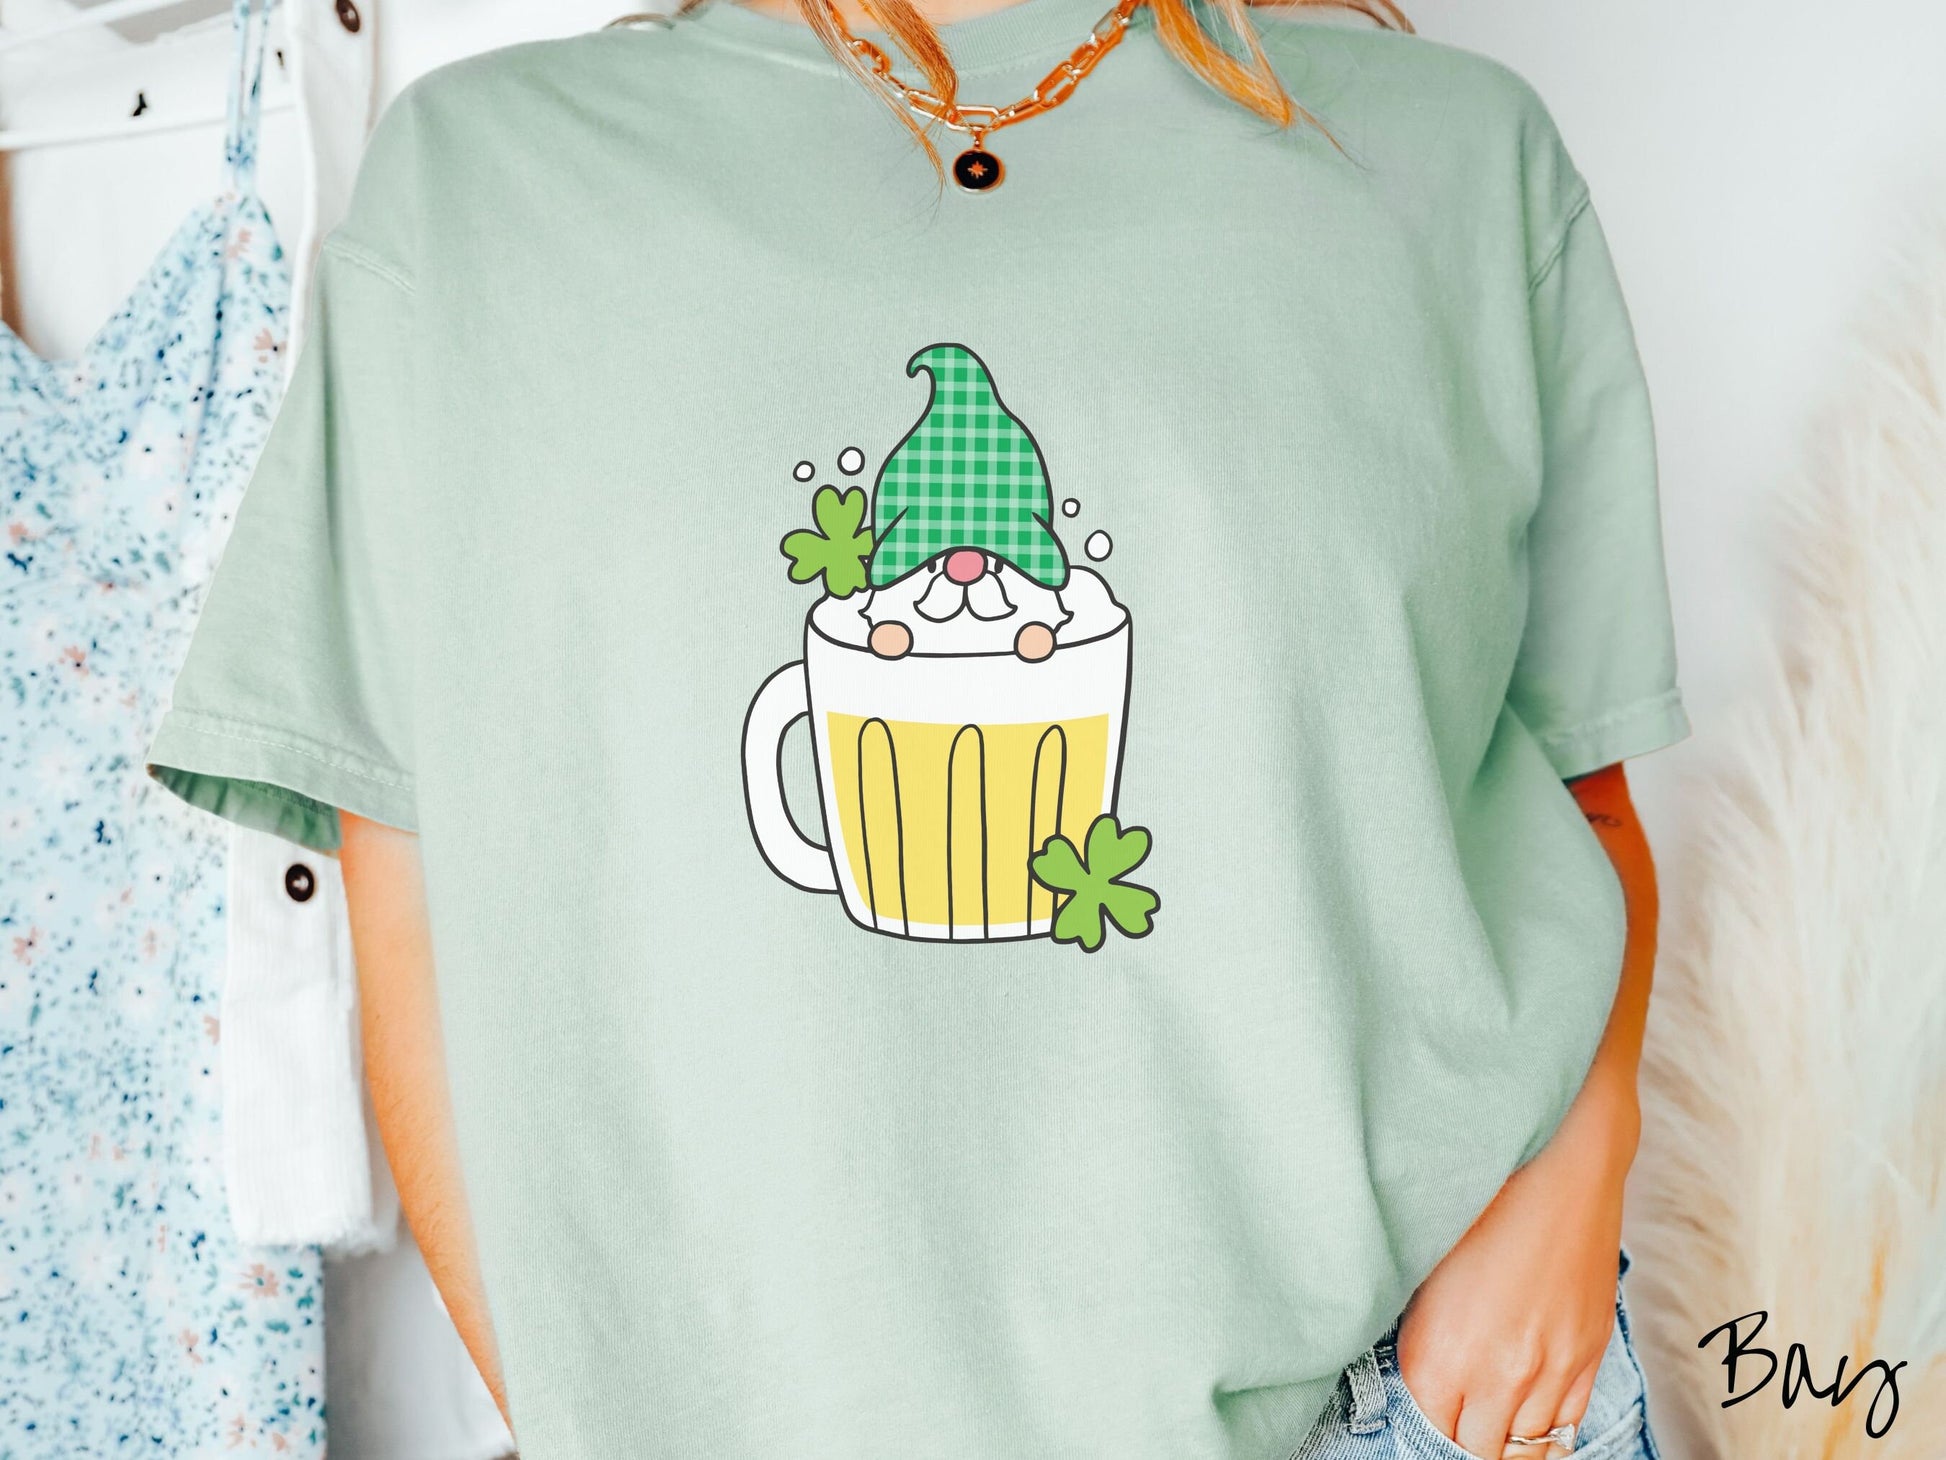 A woman wearing a vintage, bay colored shirt with a beer filled mug in the center with a green hat wearing gnome peeking over the top of the glass and green clovers in the background.